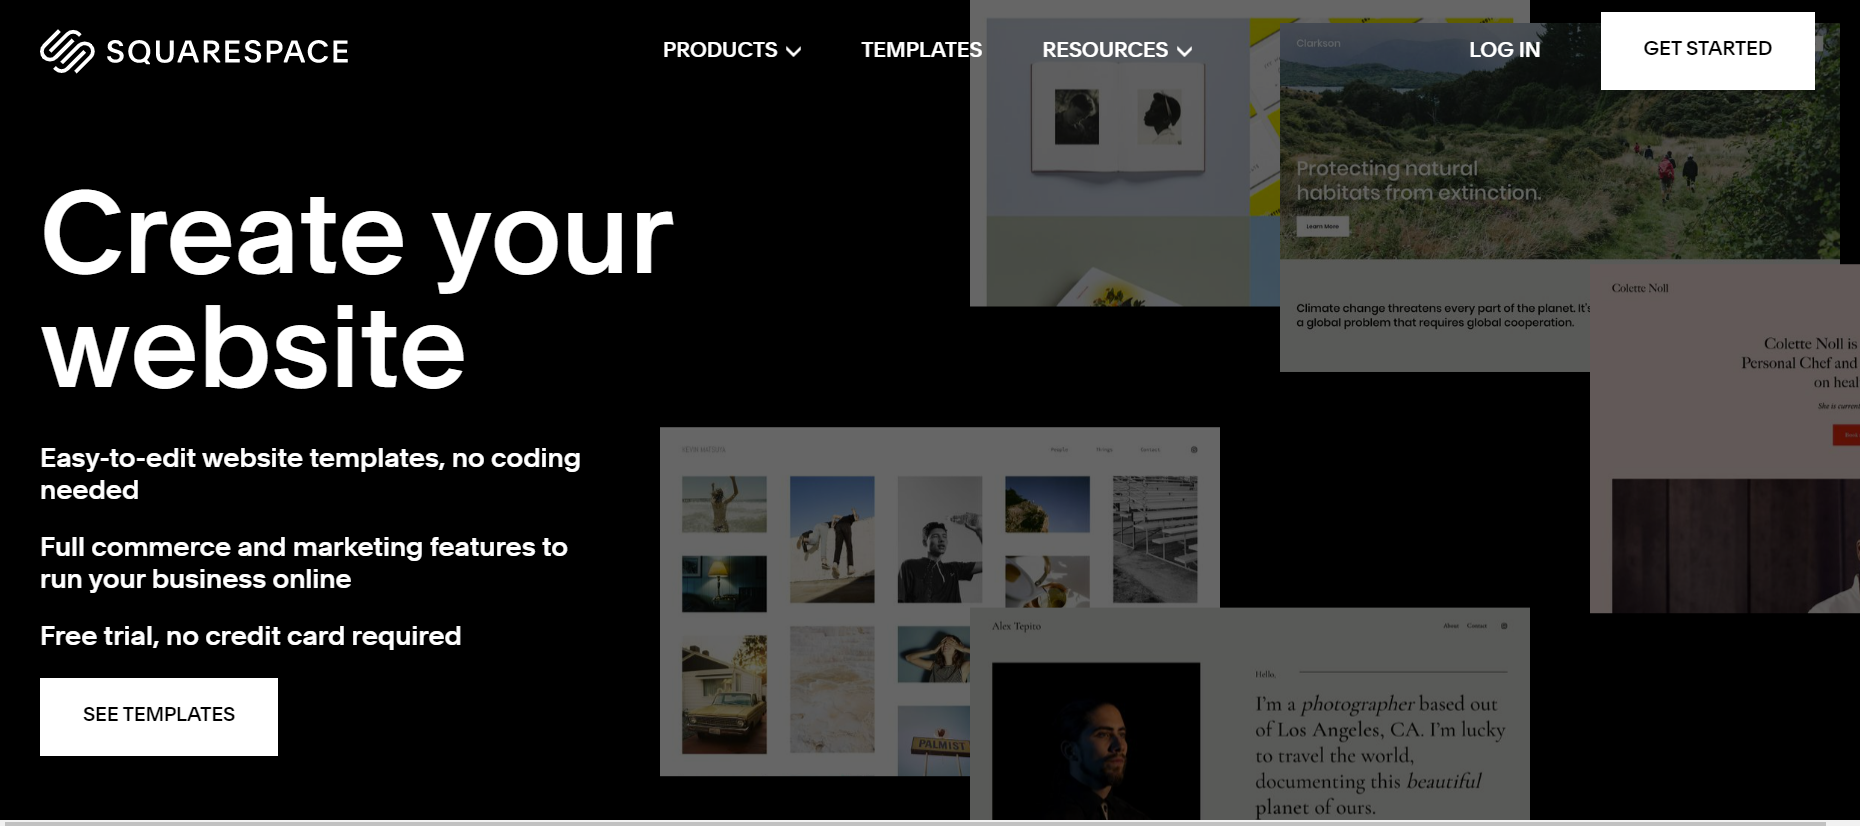 Squarespace is a website builder that provides visually appealing templates to provide structure to your website.